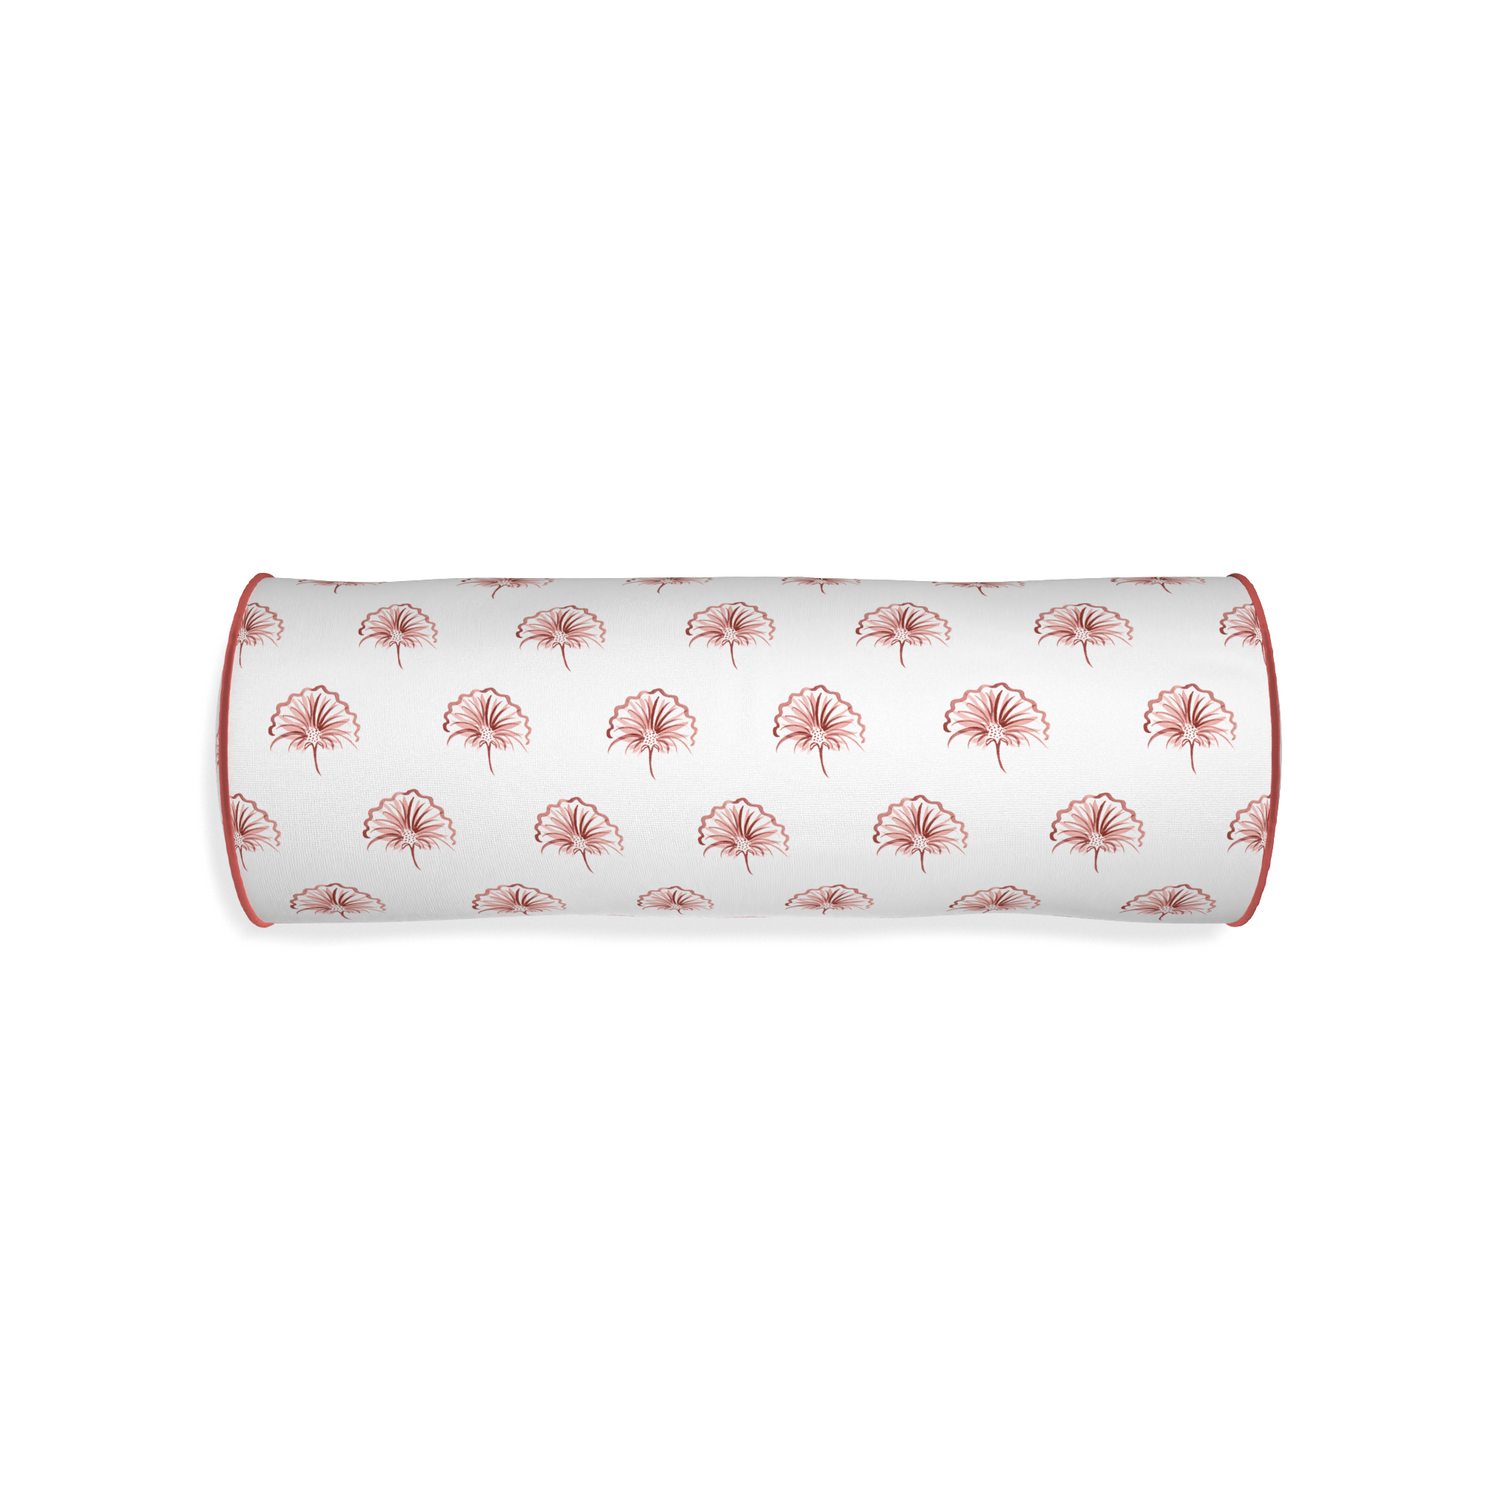 Bolster penelope rose custom floral pinkpillow with c piping on white background